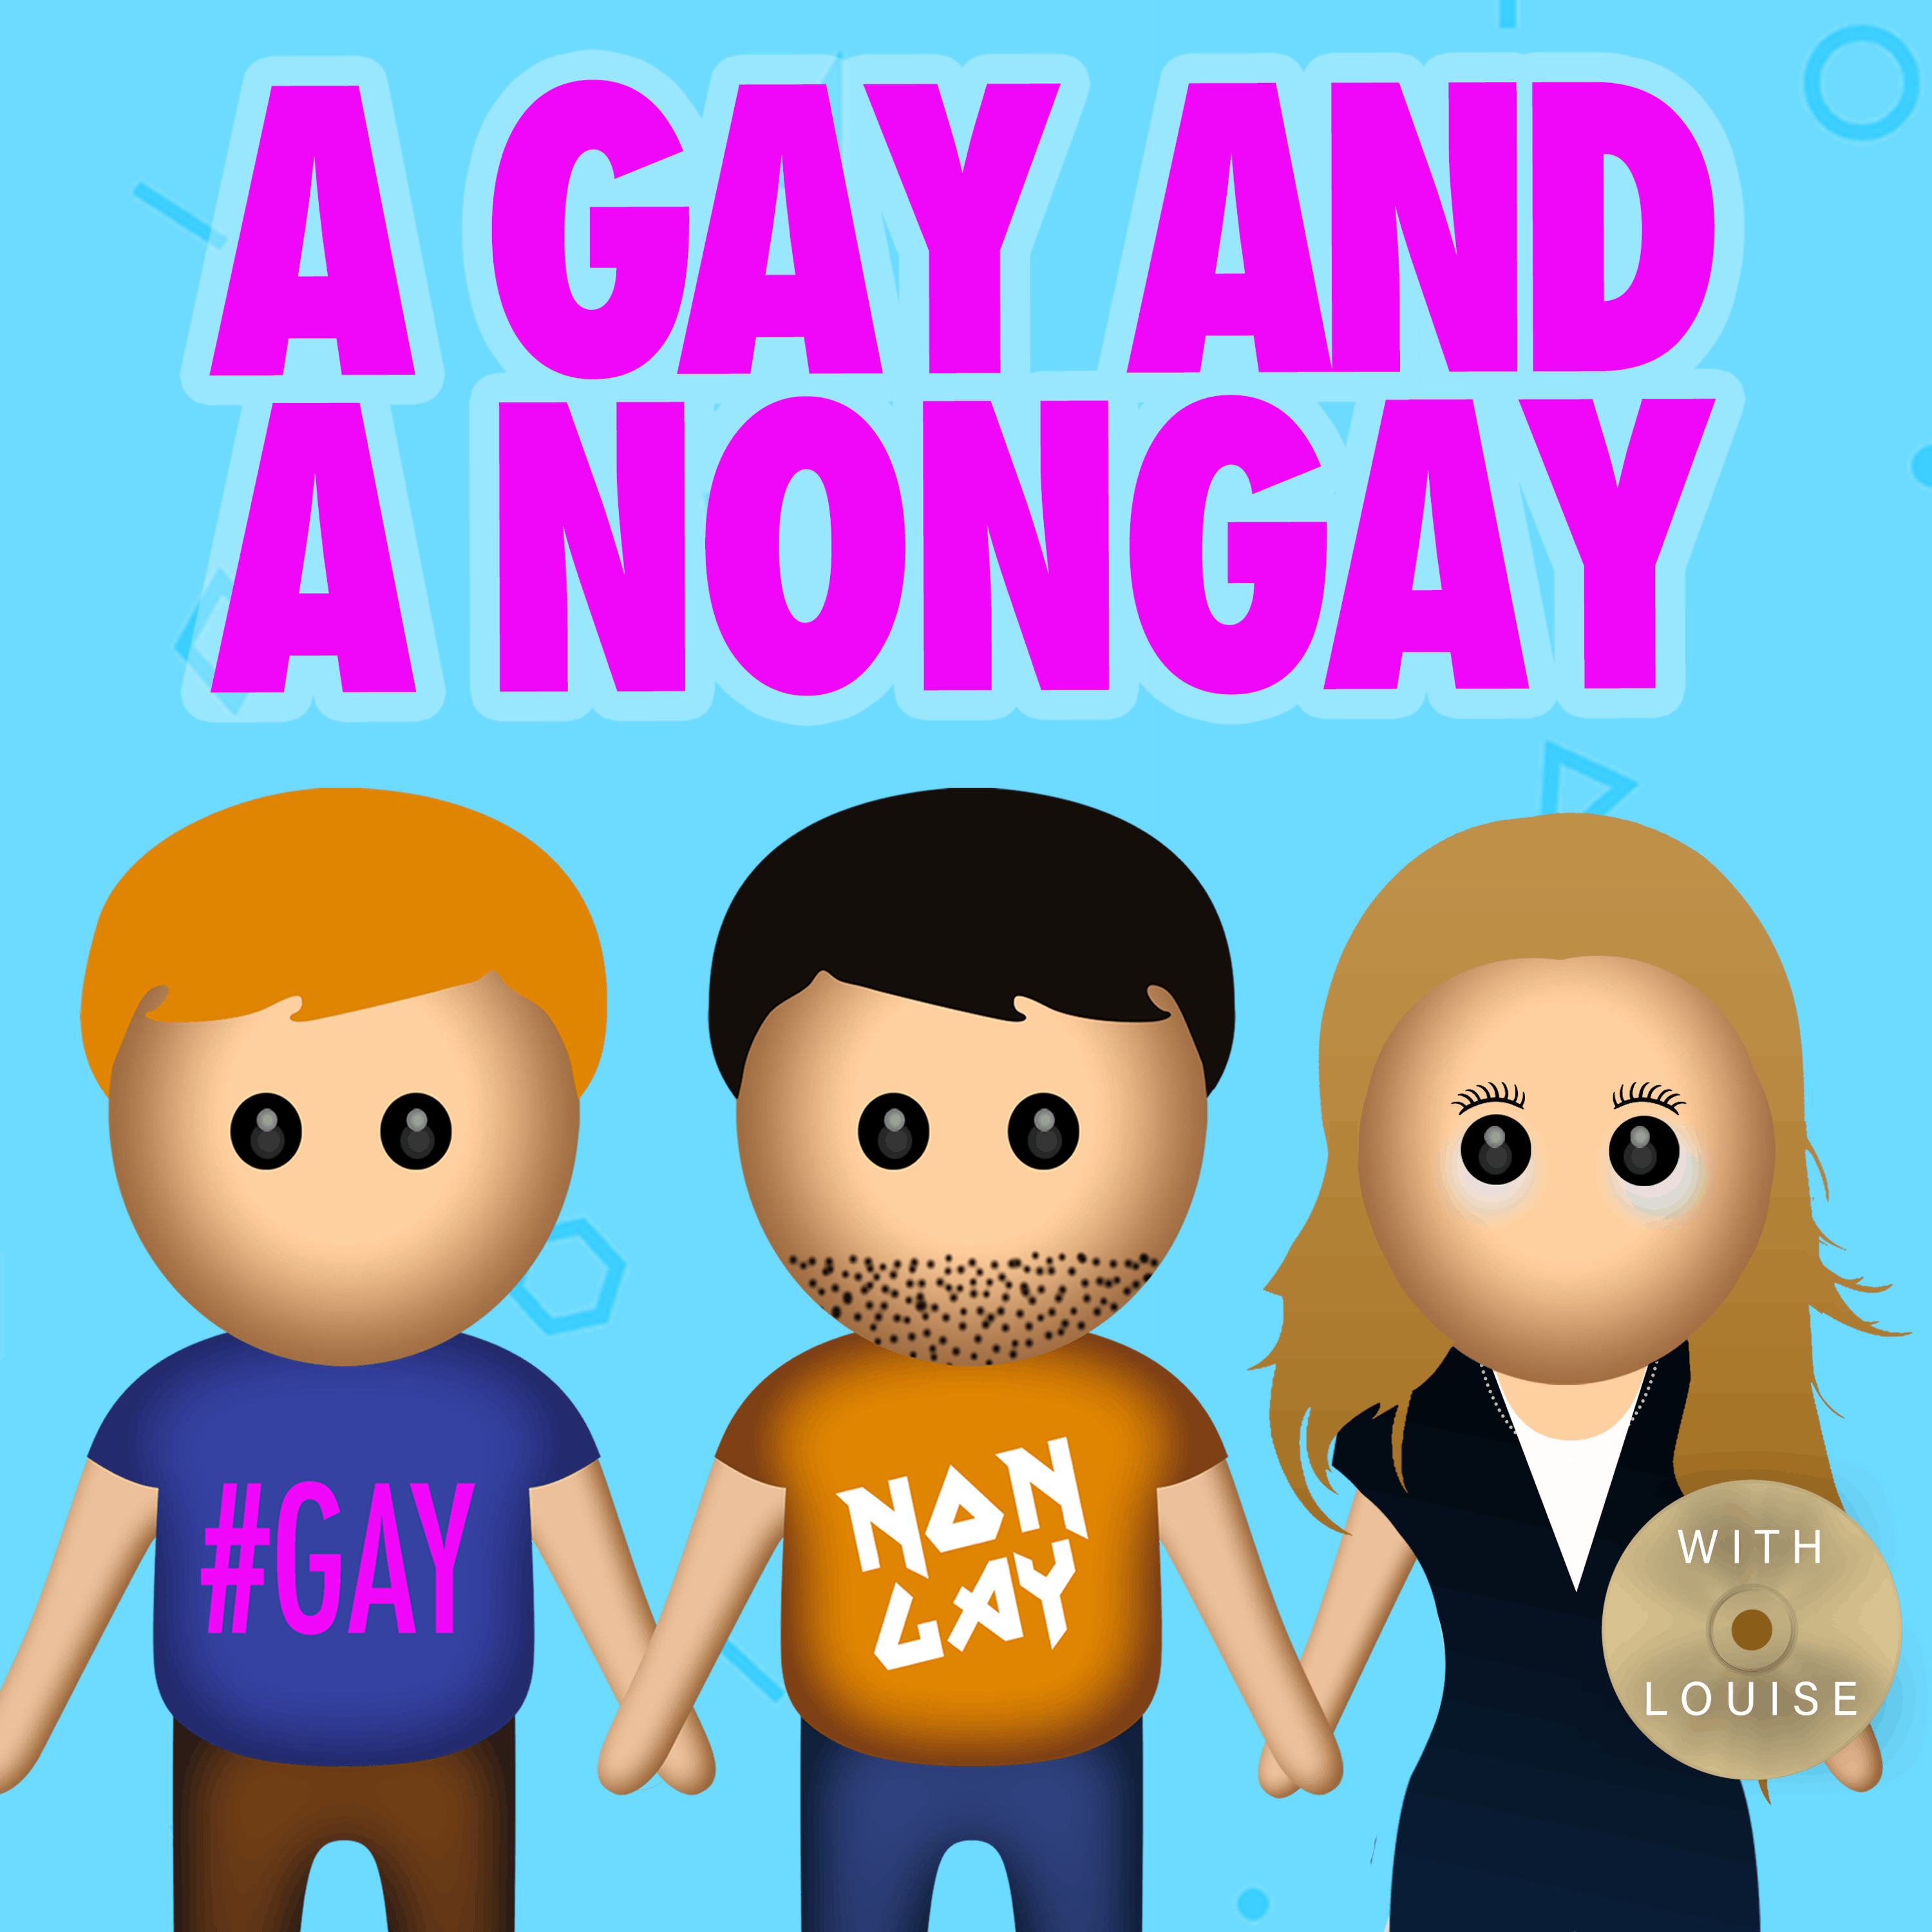 A Gay and a NonGay - with Louise!